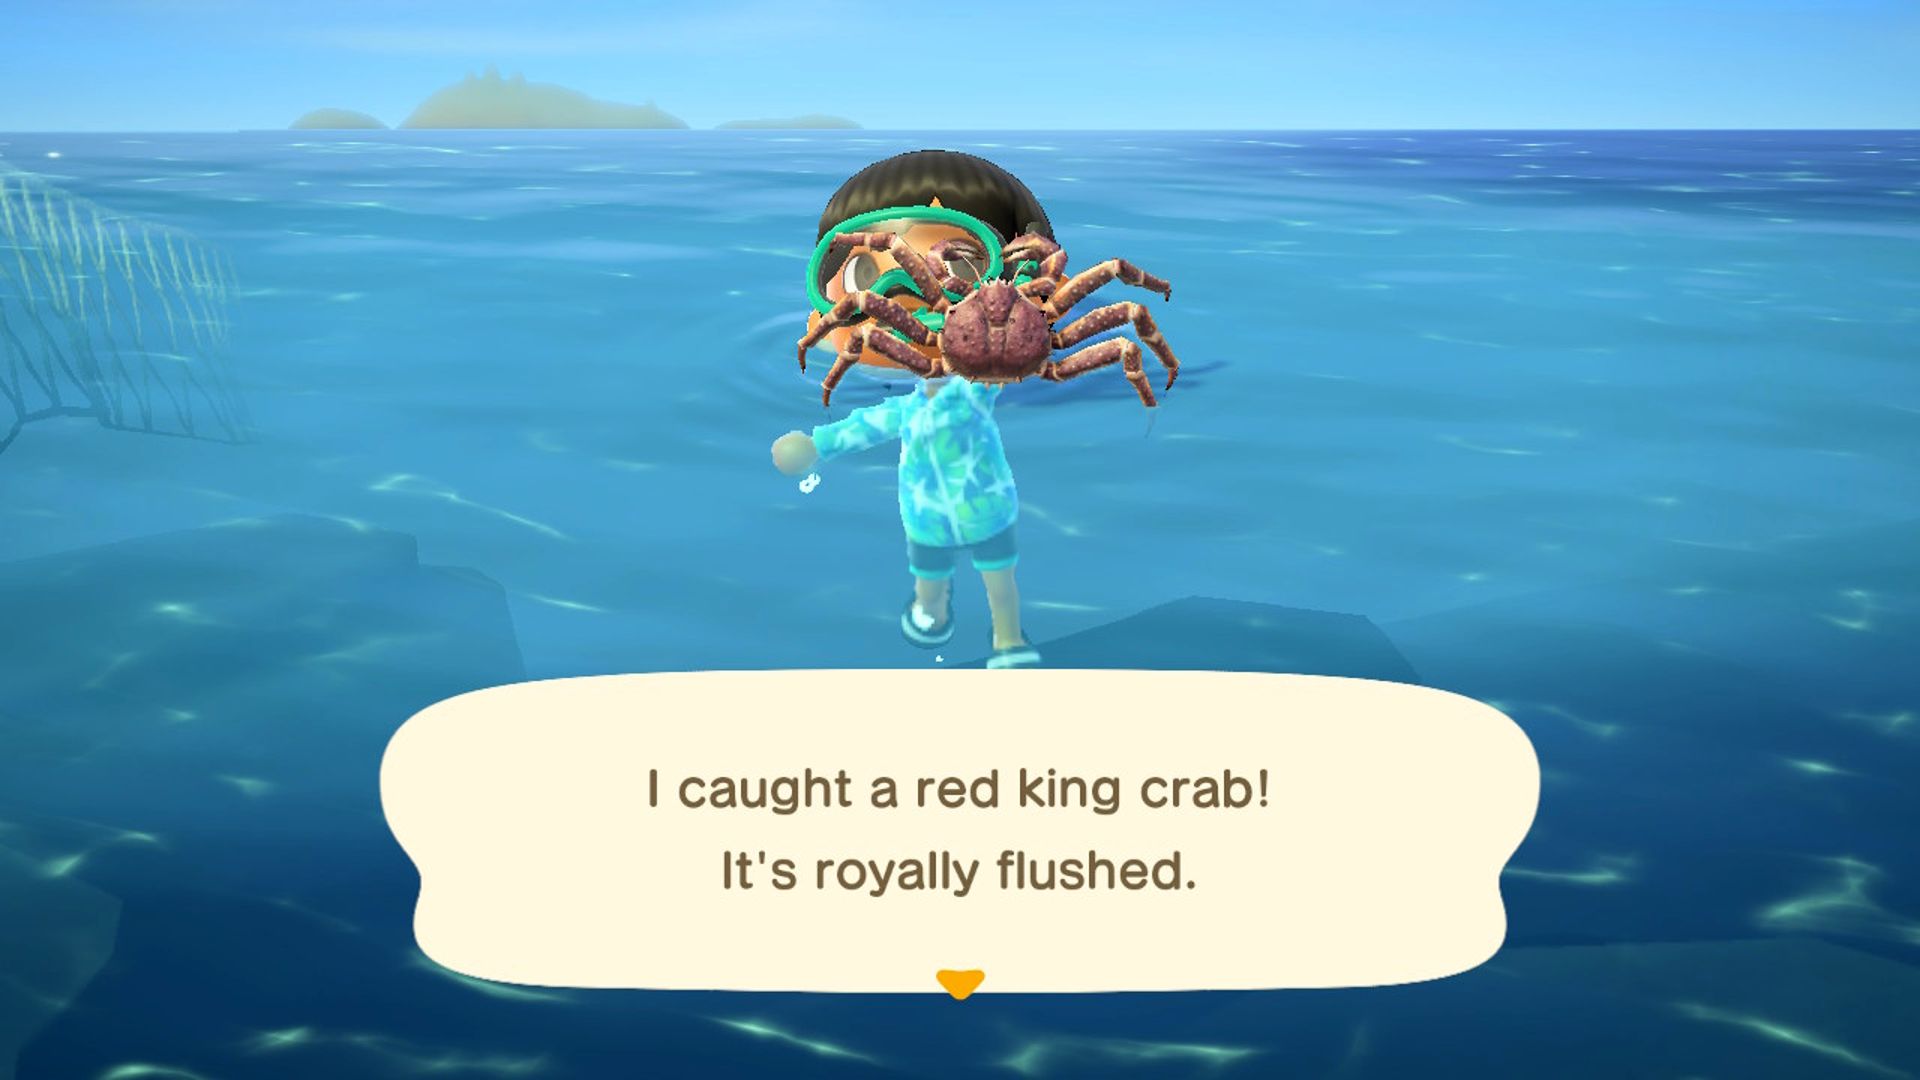 Animal Crossing New Horizons Player Catching Red King Crab In Ocean